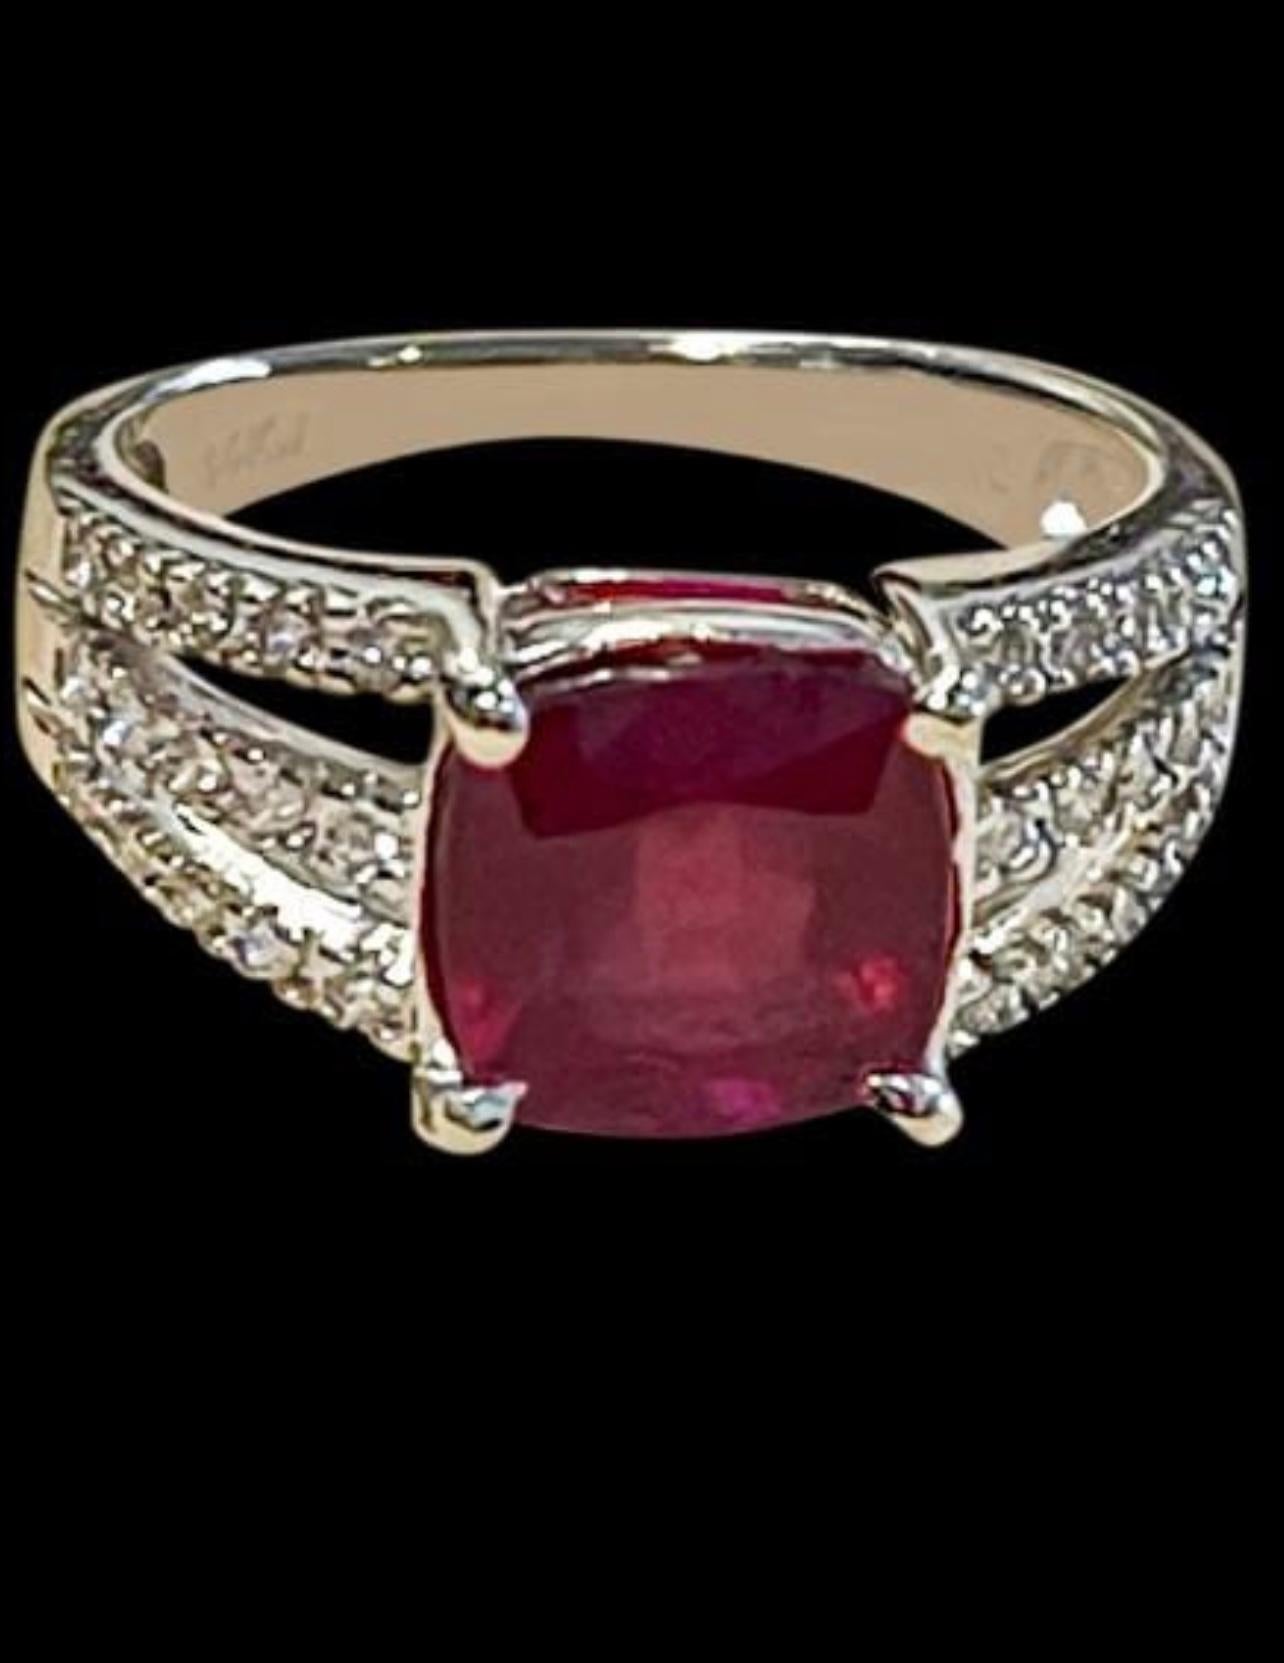 8 X 8  Cushion Cut   Approximately 3  Carat Treated Ruby  14  Karat White  Gold Ring Size 5.75
Diamond  approximately 1 ct 
Its a treated ruby prong set
14 Karat White  Gold: 4.3 gram
Ring Size 5.75  ( can be altered for no charge )
Extremally